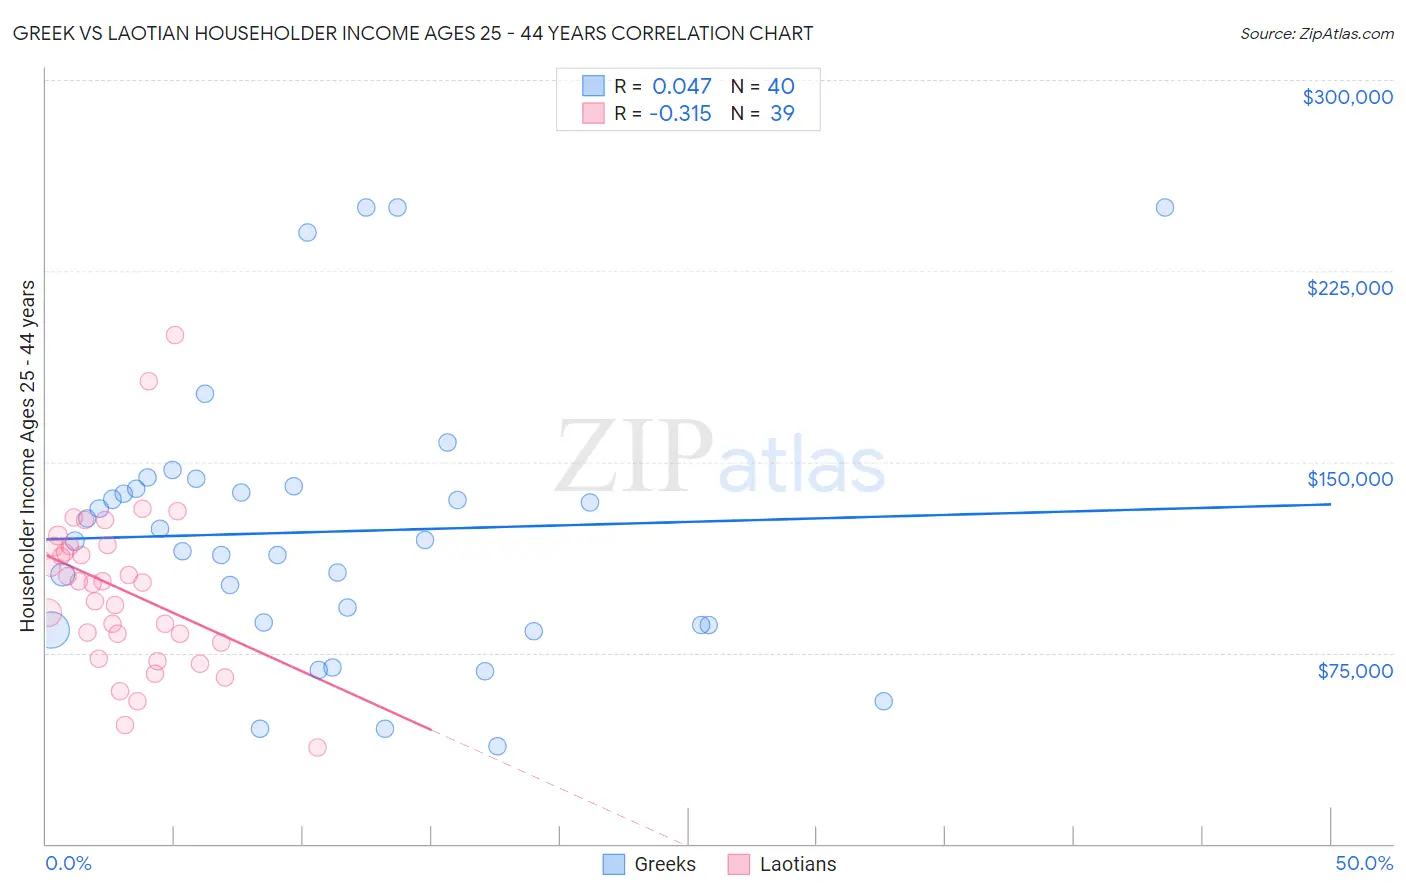 Greek vs Laotian Householder Income Ages 25 - 44 years